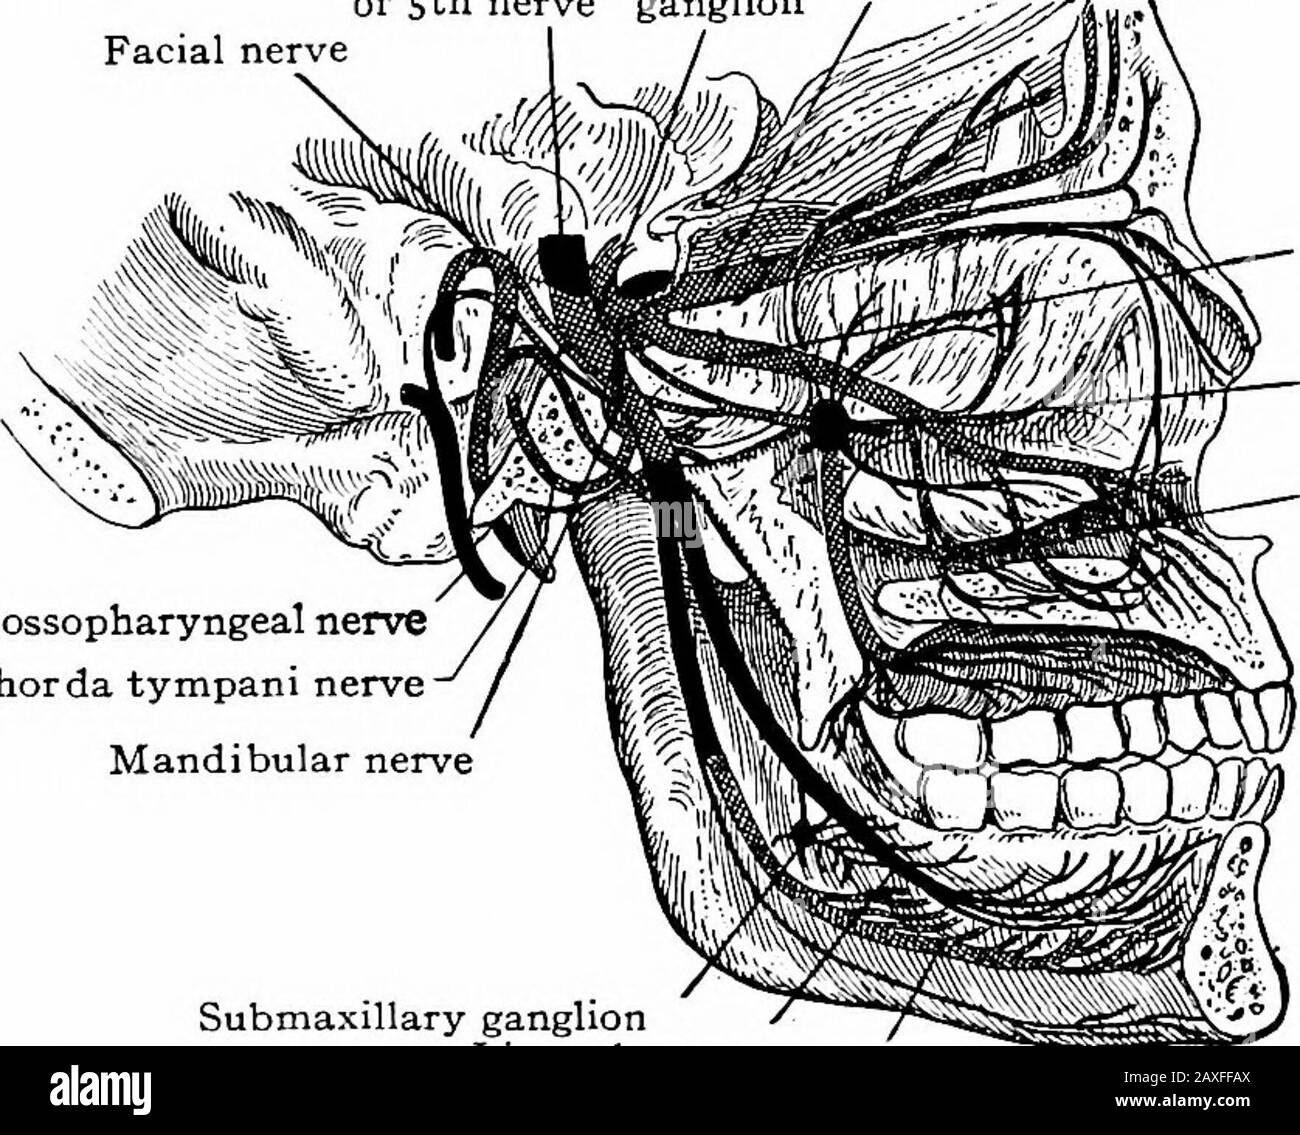 A manual of anatomy . (arcuata) pass through the raphe to the oppo-site side and proceed upward to the thalamus where new fibers ariseand pass to the sensor area of the cerebral cortex. Some fibers passfrom the sensor to the motor nucleus thus establishing a simplereflex arc. The trigeminal nerve is attached to the brain at the middle of the 444 THE NERVE SYSTEM lateral border of the pons. It consists of two roots, the larger, sensorand the smaller, motor. As these two roots pass forward and reachthe apex of the petrous portion of the temporal bone the sensor rootexhibits an enlargement, the s Stock Photo